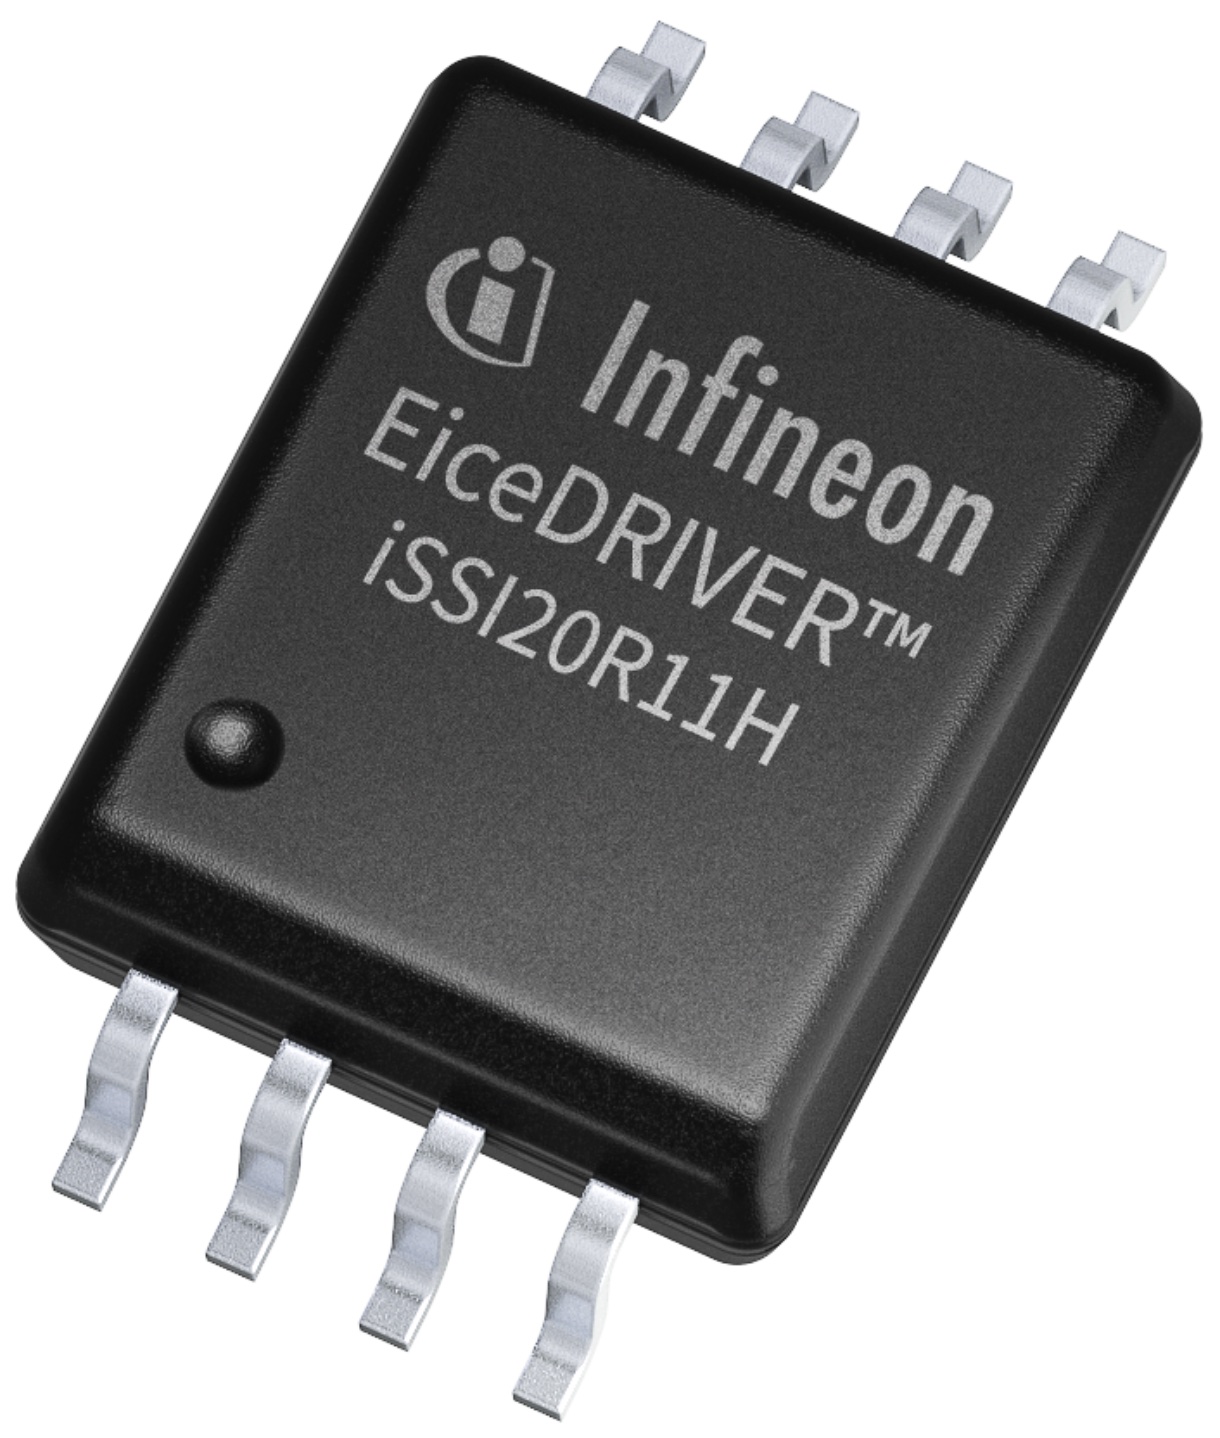 Solid-State Isolators to Deliver Faster Switching with up to 70 percent Lower Power Dissipation